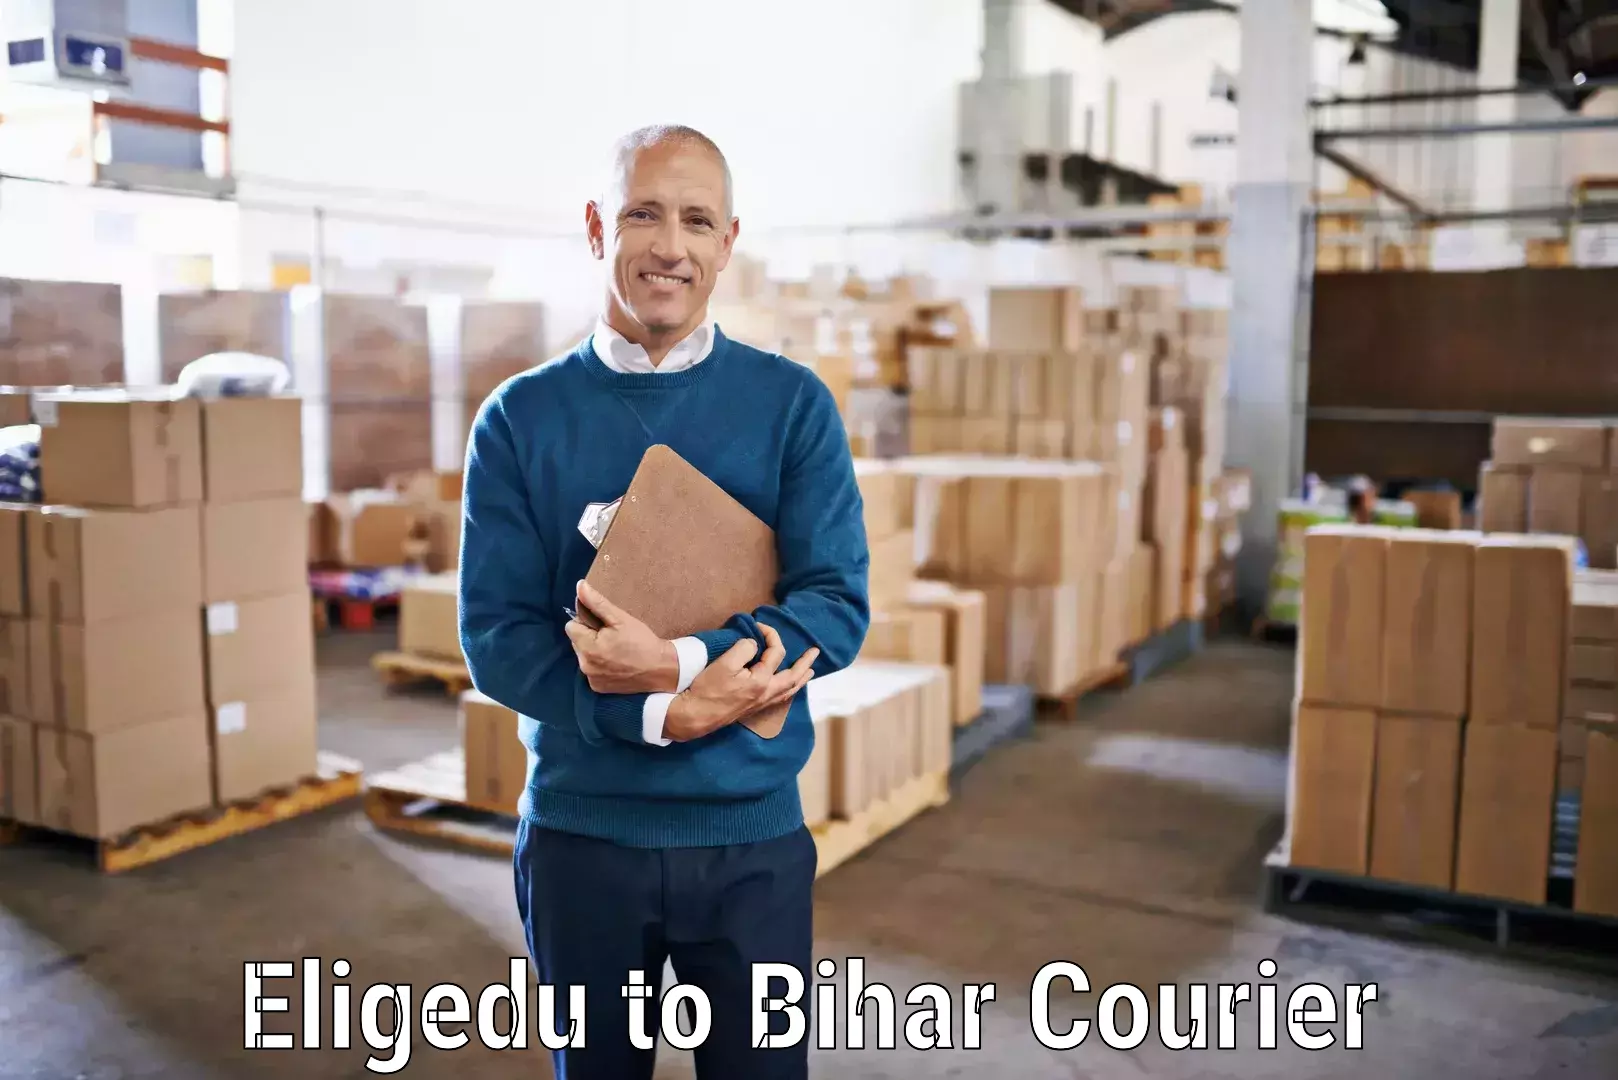 Professional courier services Eligedu to Piro